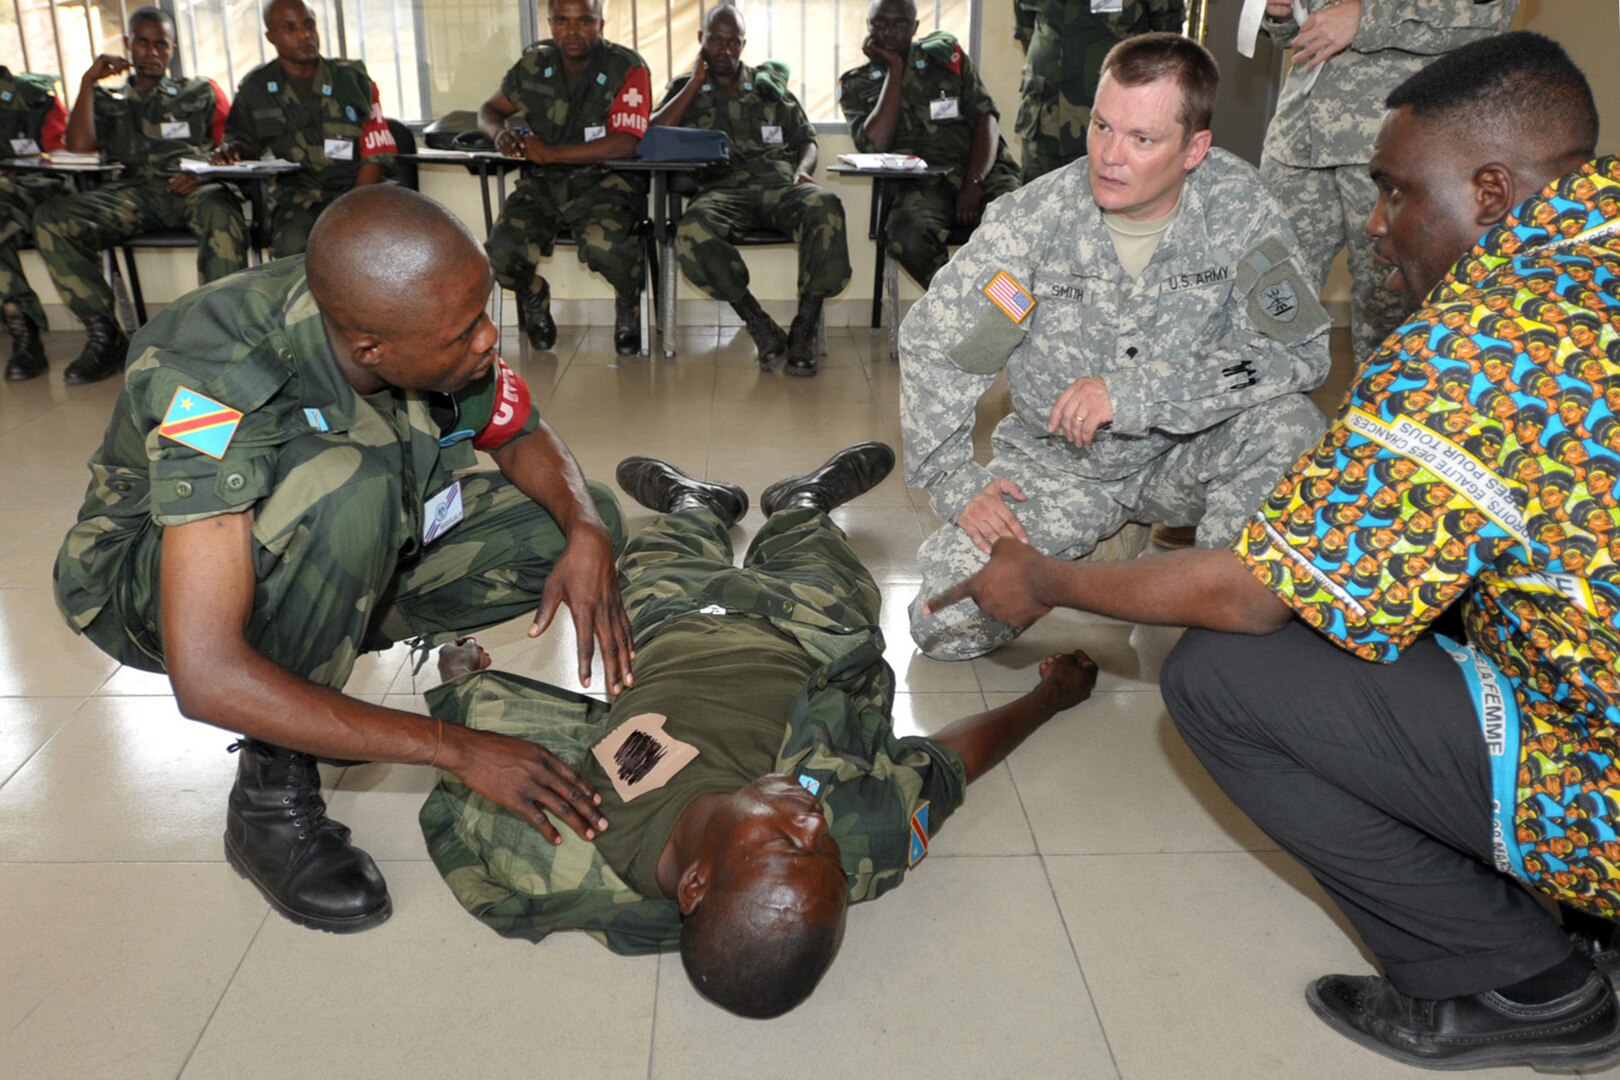 Spc. Ricky Smith of the North Dakota National Guard teaches members of the Armed Forces of the Democratic Republic of Congo how to evaluate a casualty. Smith, a member of the 814th Army Medical Support Company, Detachment 1, based in Grand Forks N.D., is in Congo as part of MEDFLAG 10 a joint military training exercise between the U.S. military and FARDC soldiers to enhance emergency response capabilities in the region.